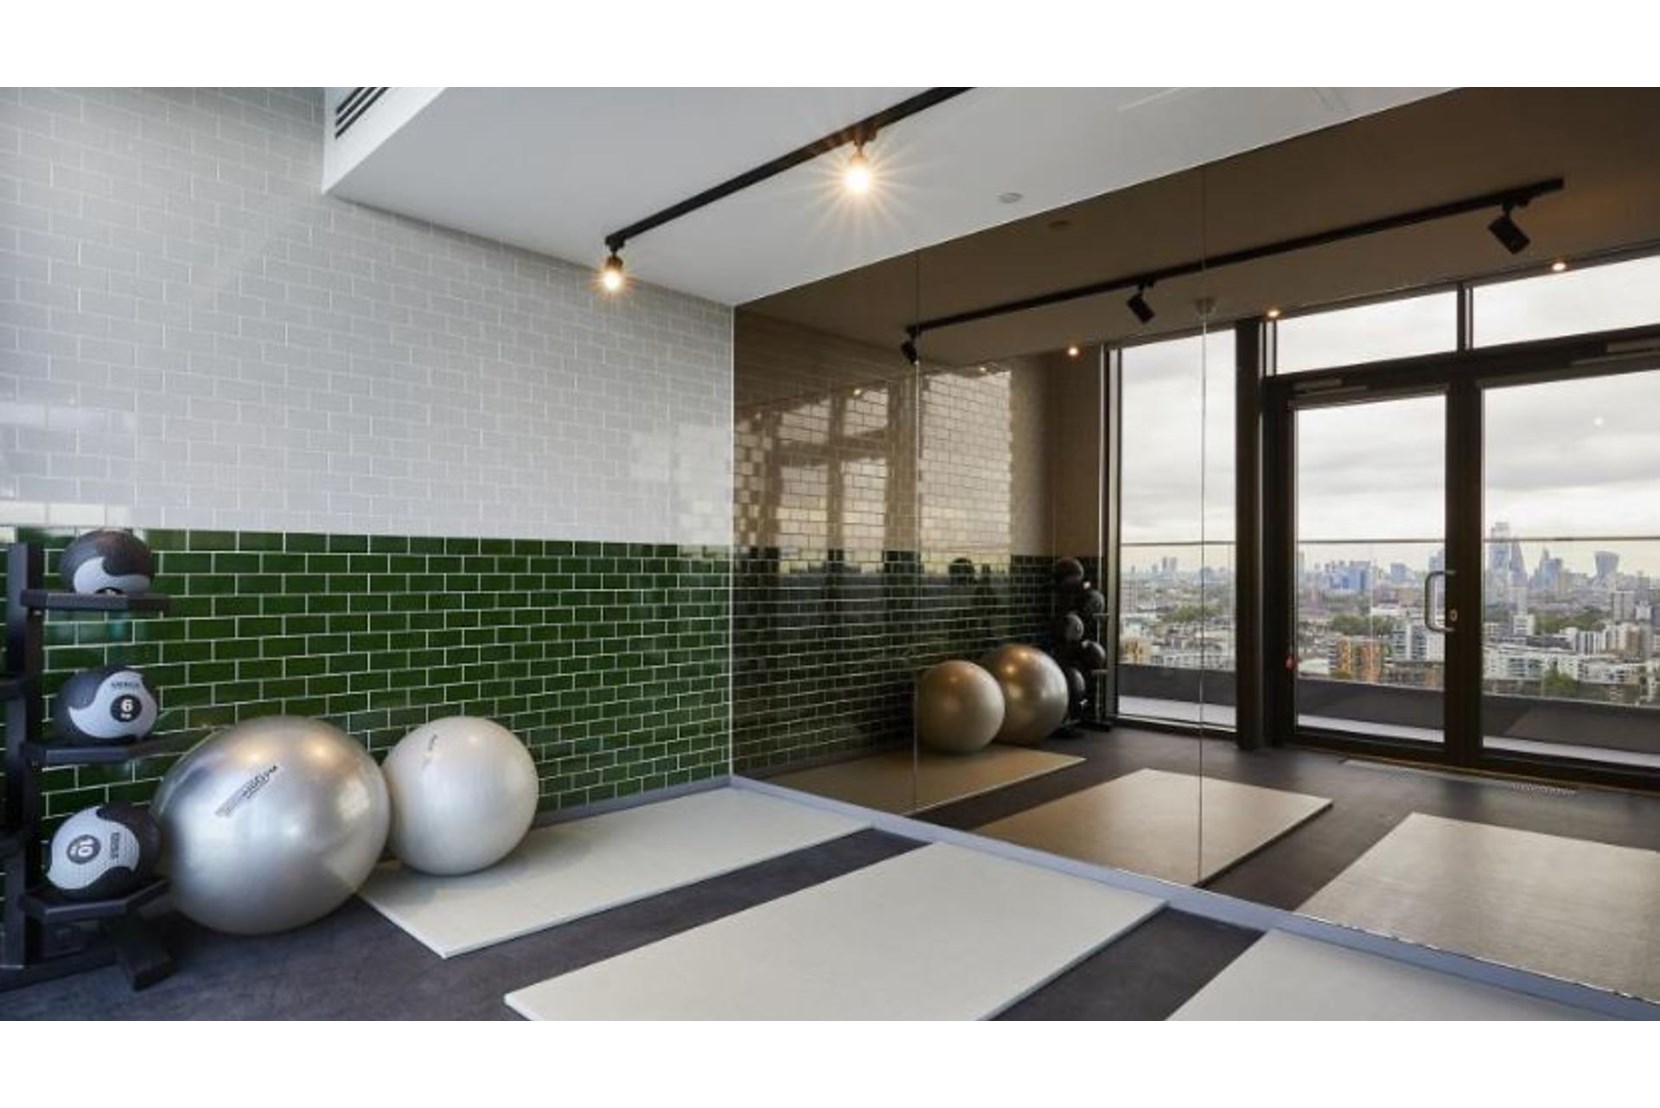 Apartments to Rent by Savills at The Highline, Tower Hamlets, E14, gym